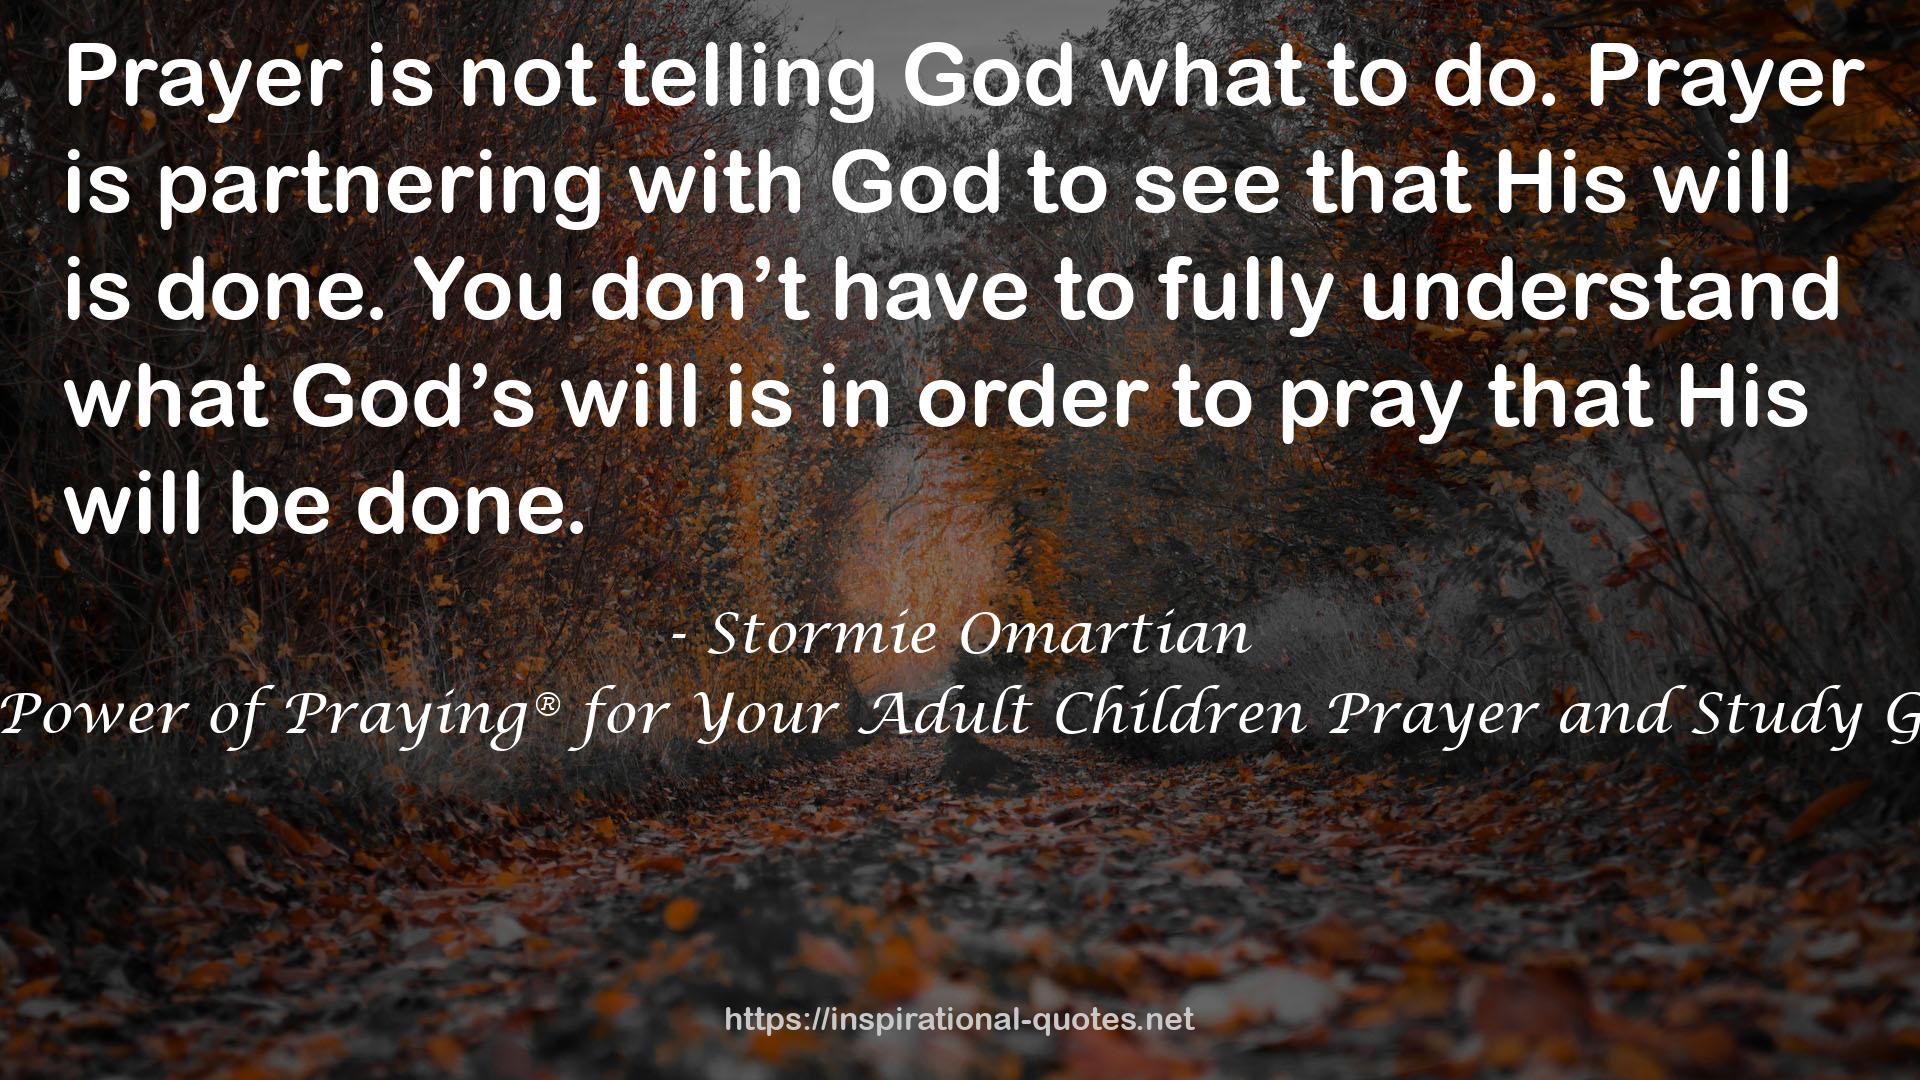 The Power of Praying® for Your Adult Children Prayer and Study Guide QUOTES